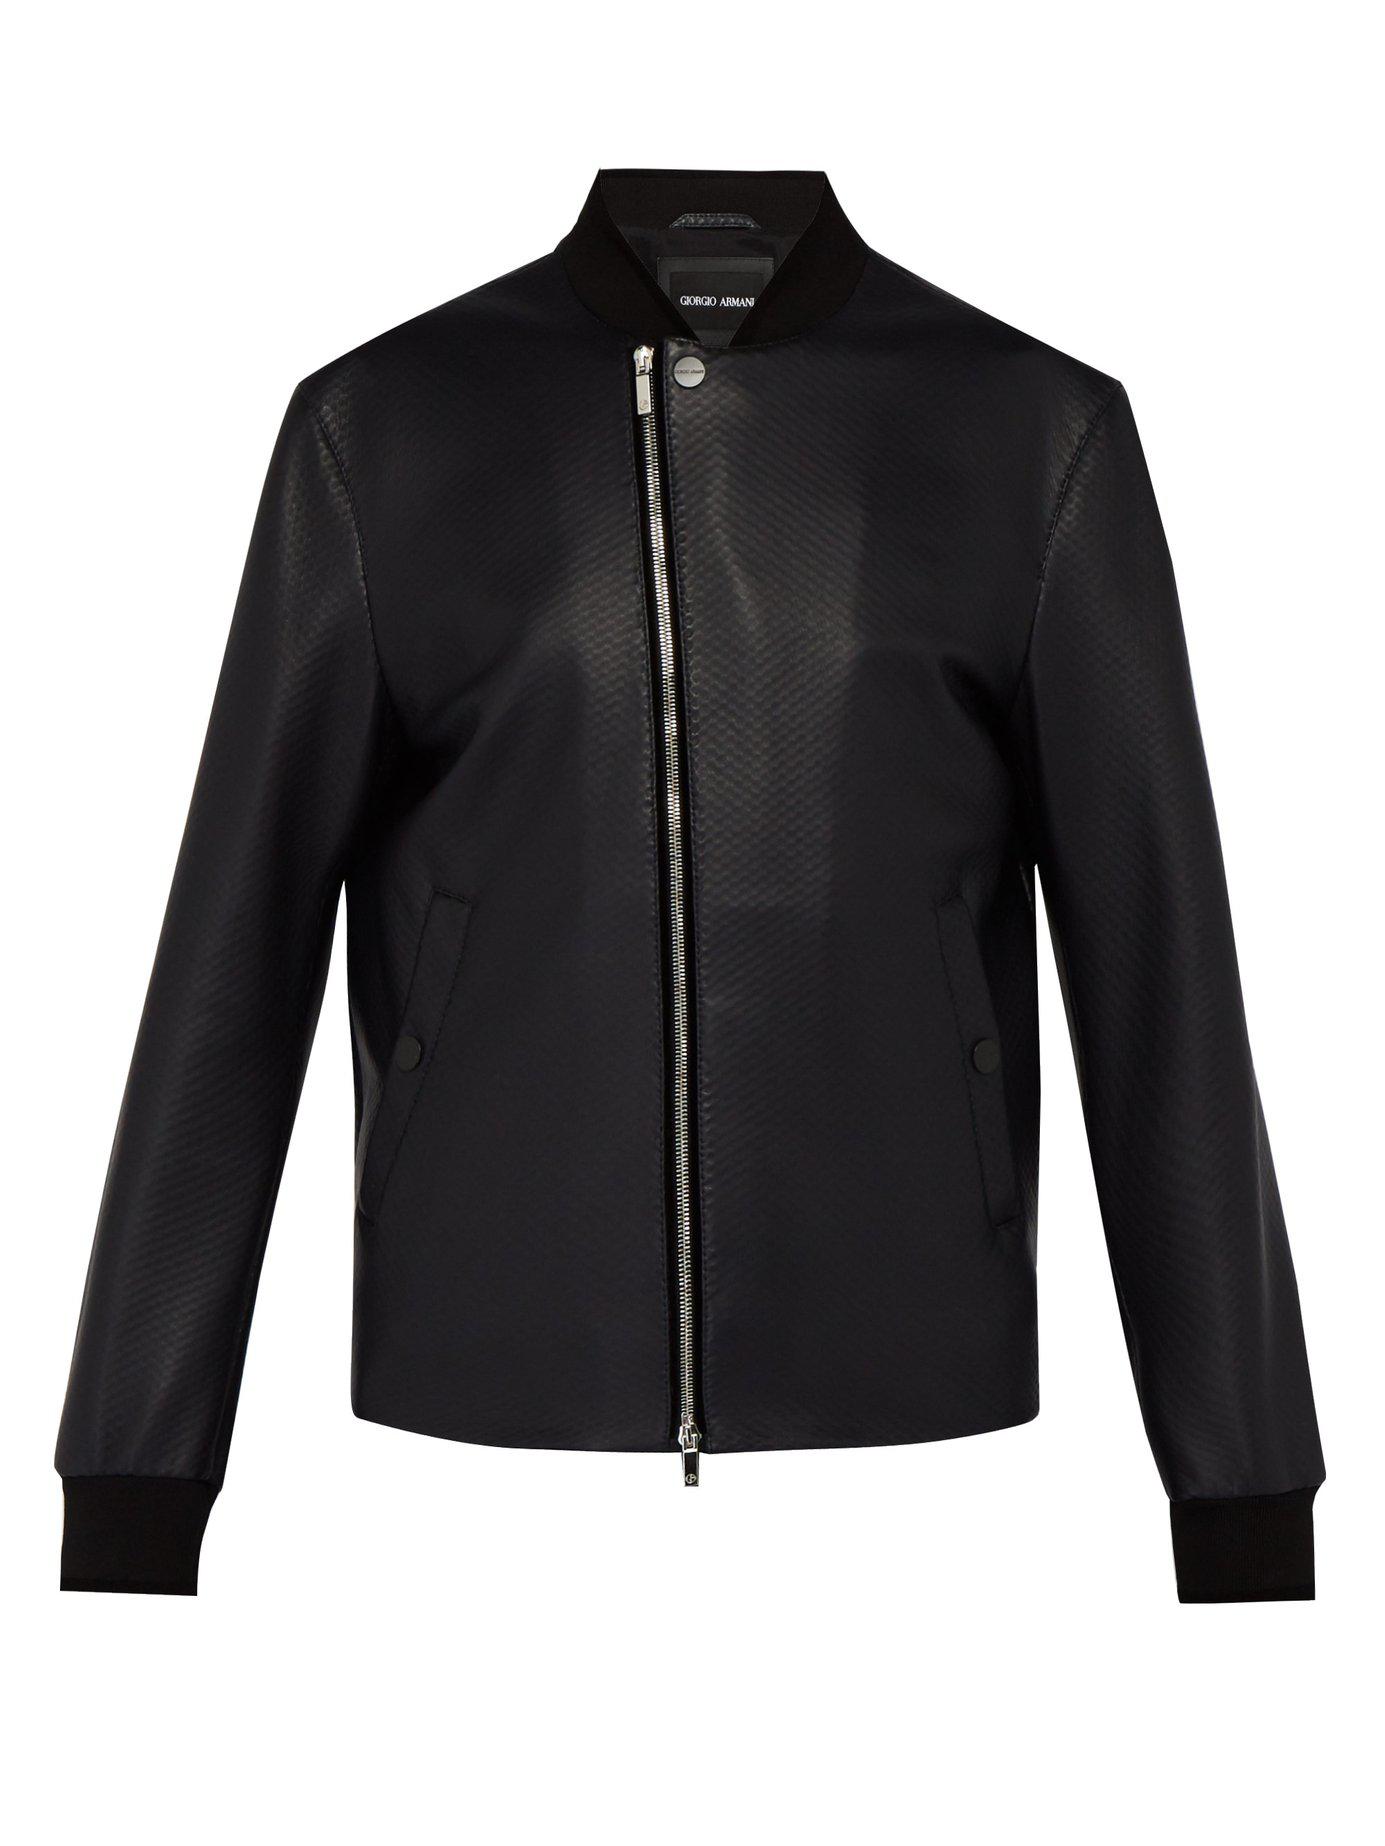 Giorgio Armani Bonded Leather Bomber Jacket in Navy (Blue) for Men - Lyst